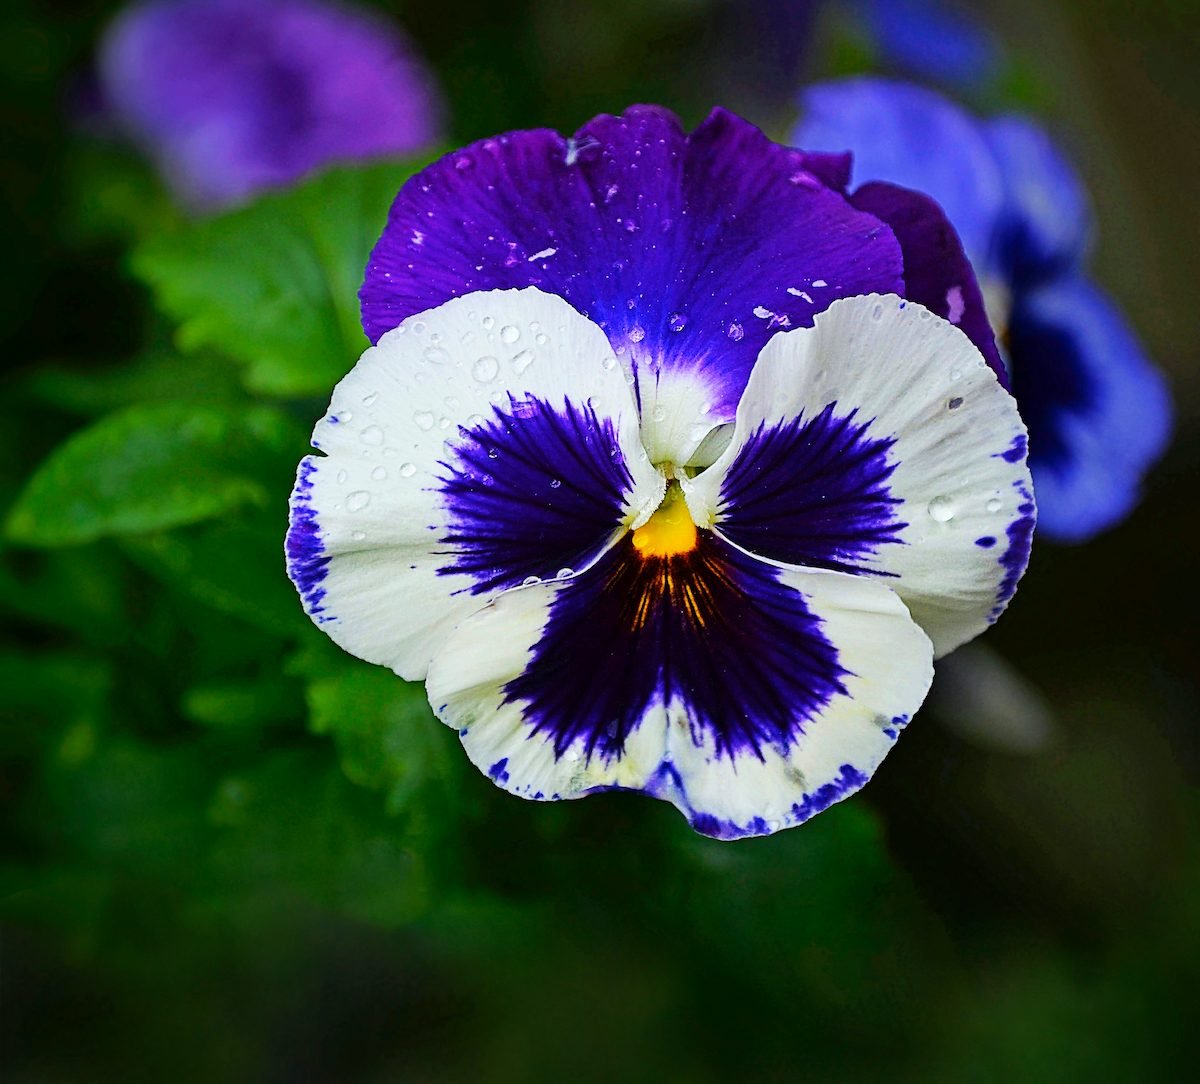 grow garden pansy flowers for early blooms - birds and blooms